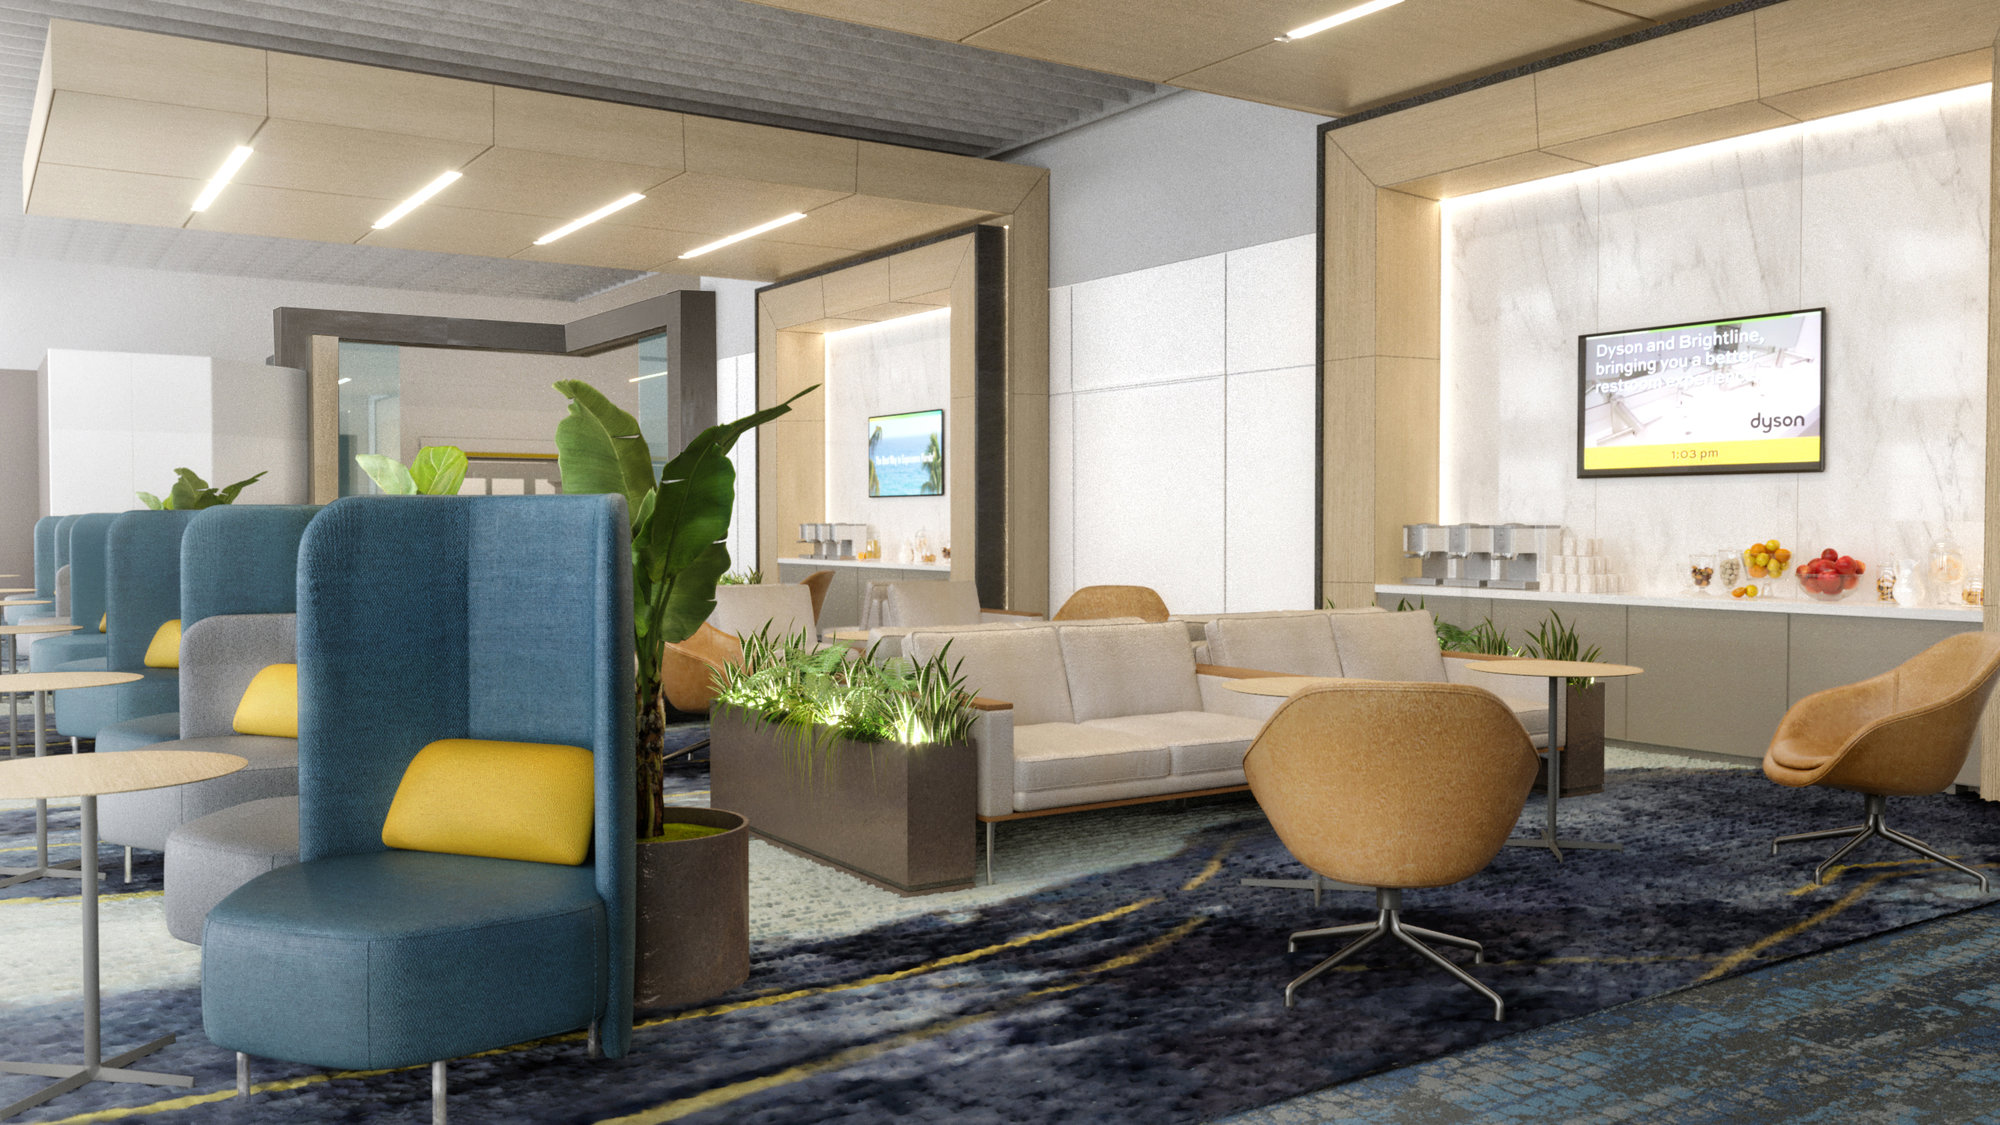 brightline premium lounge with blue chairs and brown couches in a secluded area